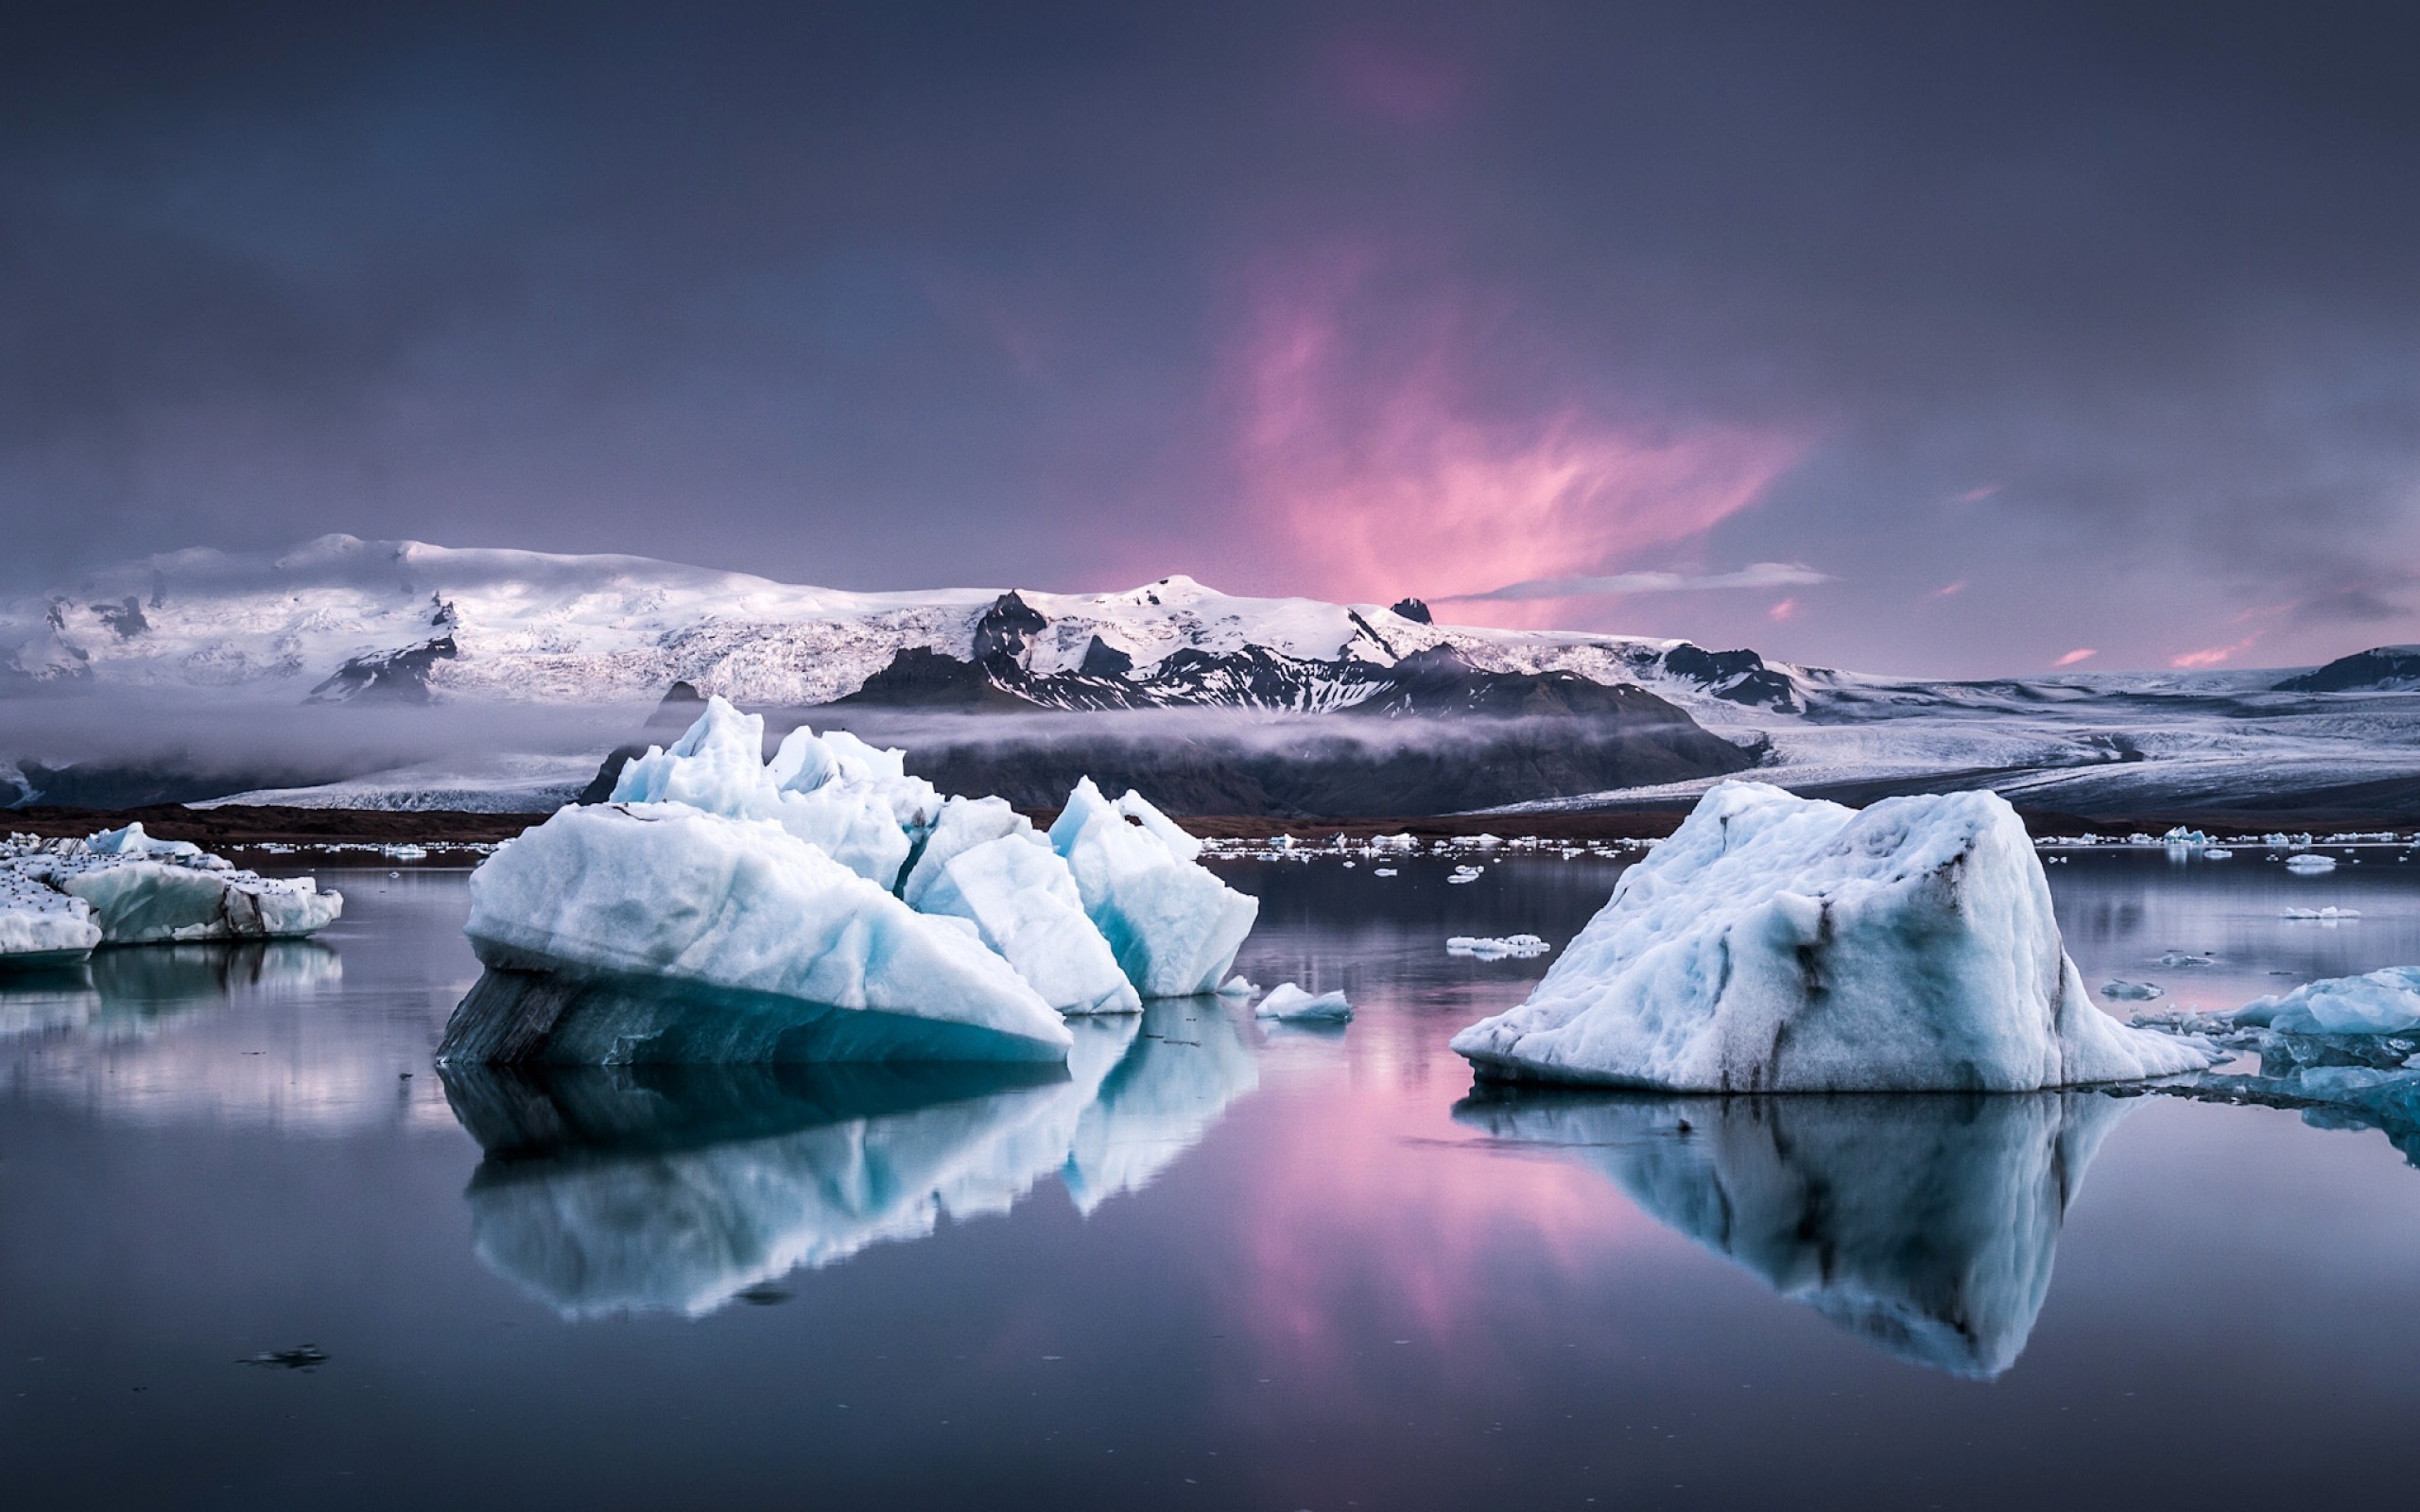 100 Iceland Pictures Stunning  Download Free Images on Unsplash